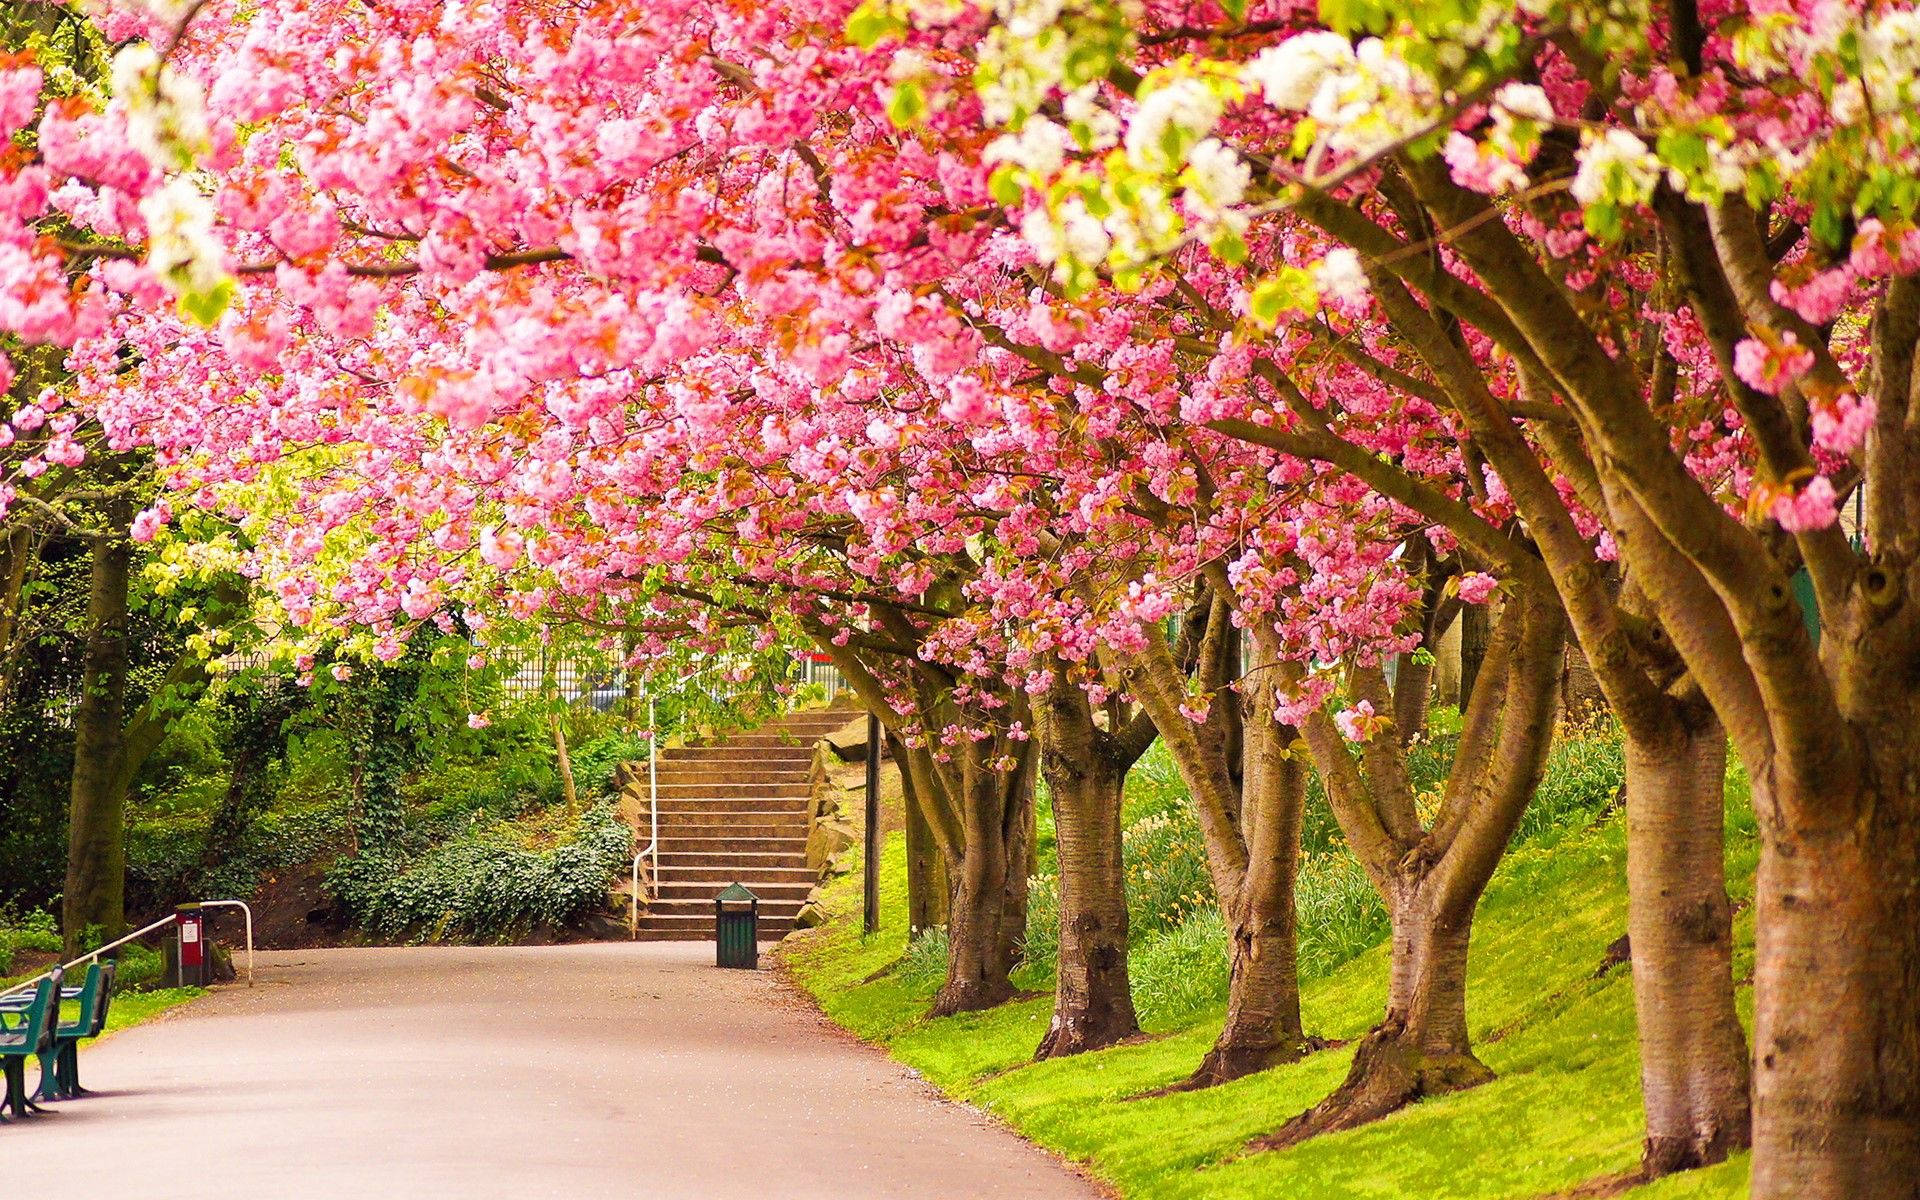 A stunning view of sakura trees in bloom at a park in Spring Wallpaper